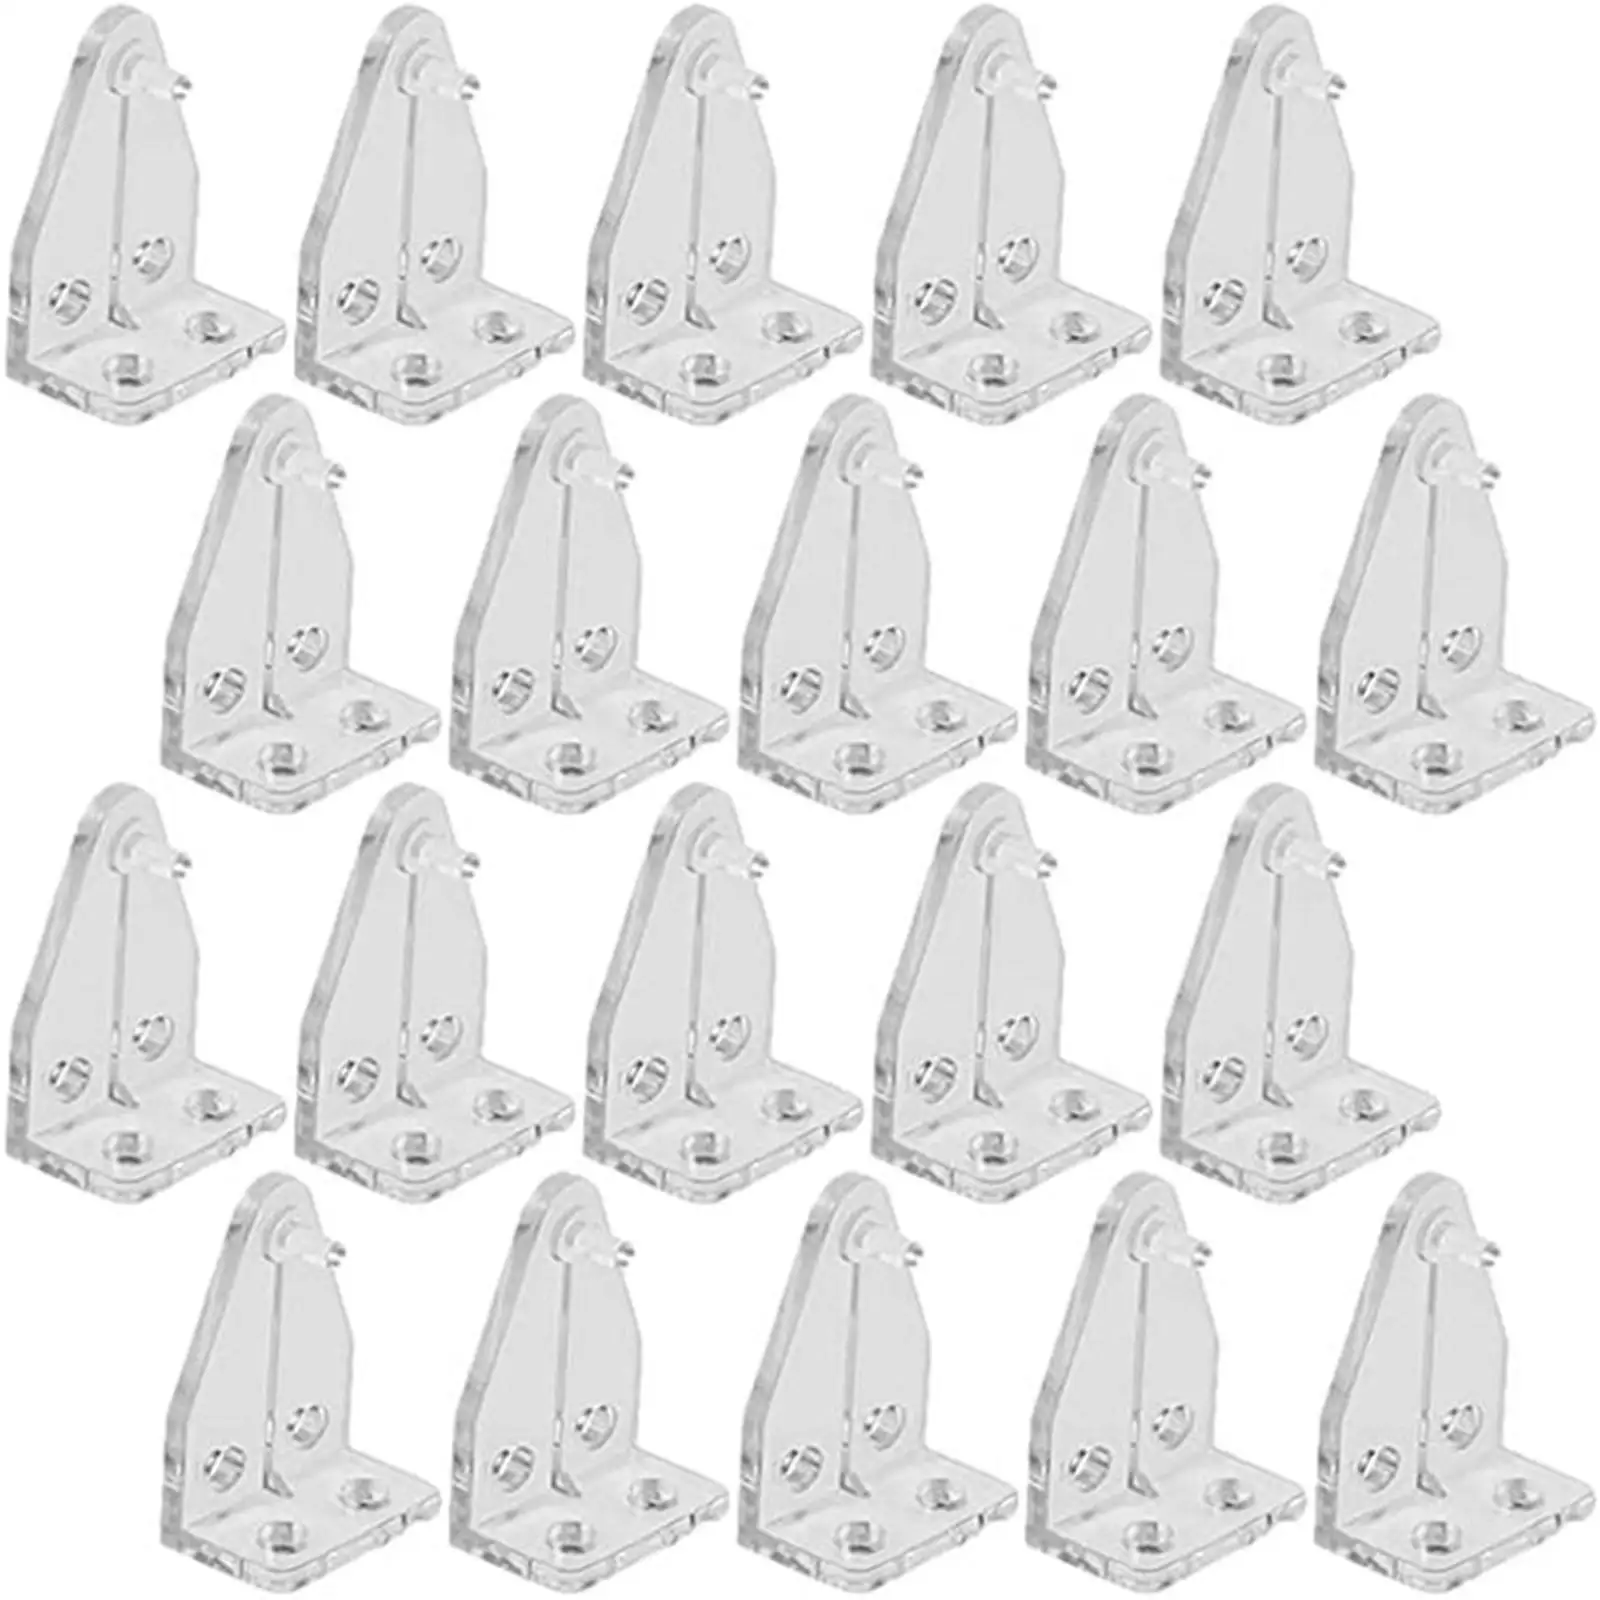 20x Blinds Positioning Hooks Holder Fittings Window Replacements Durable